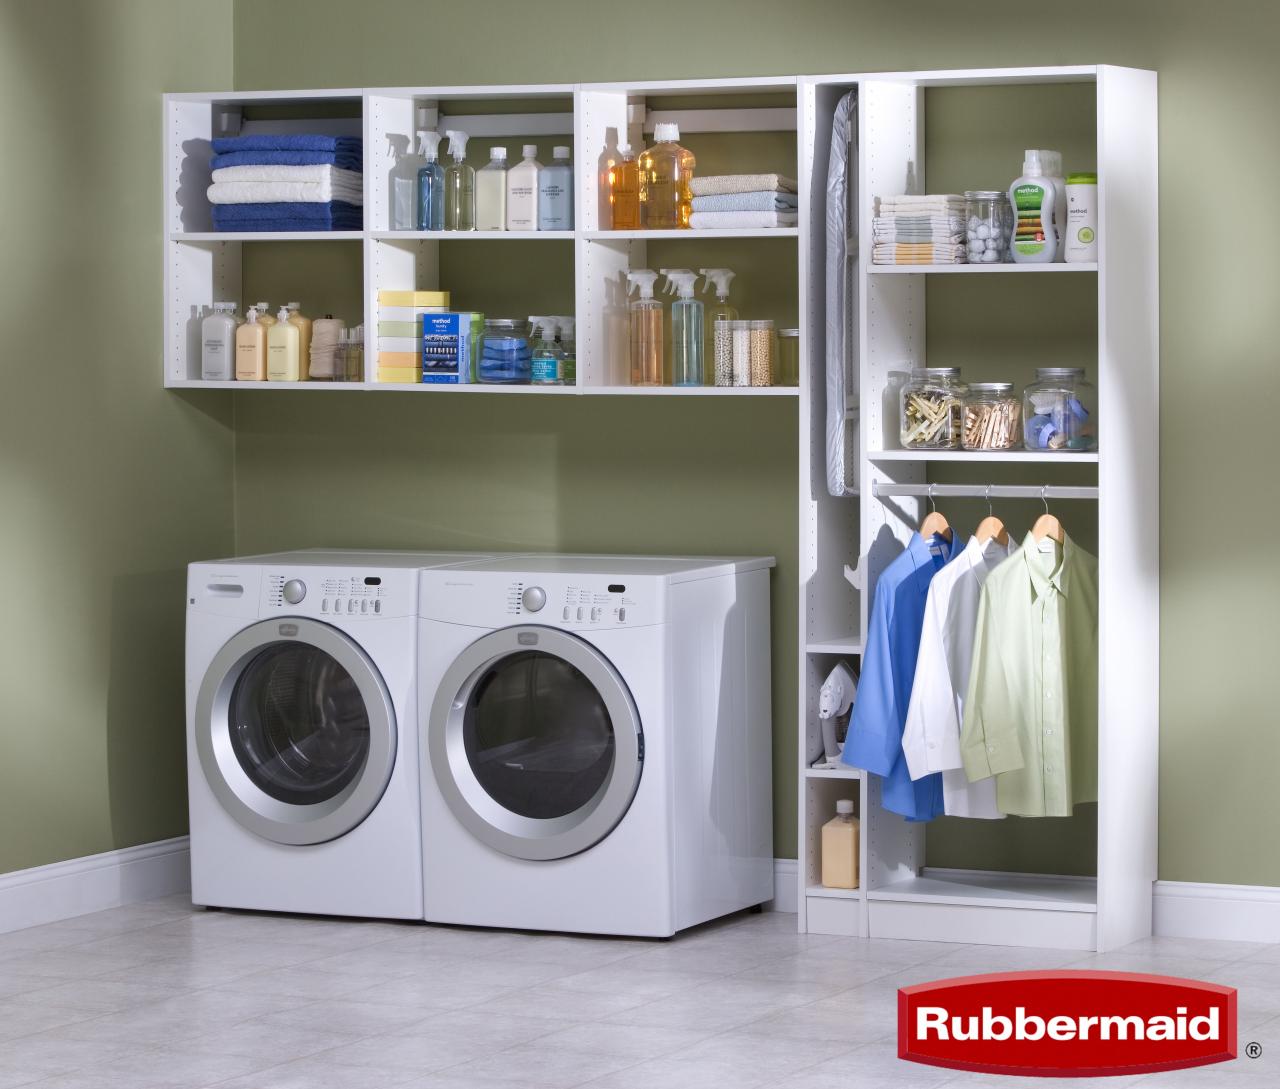 Rubbermaid Closet System. Superior Corp of IL is an Authorized